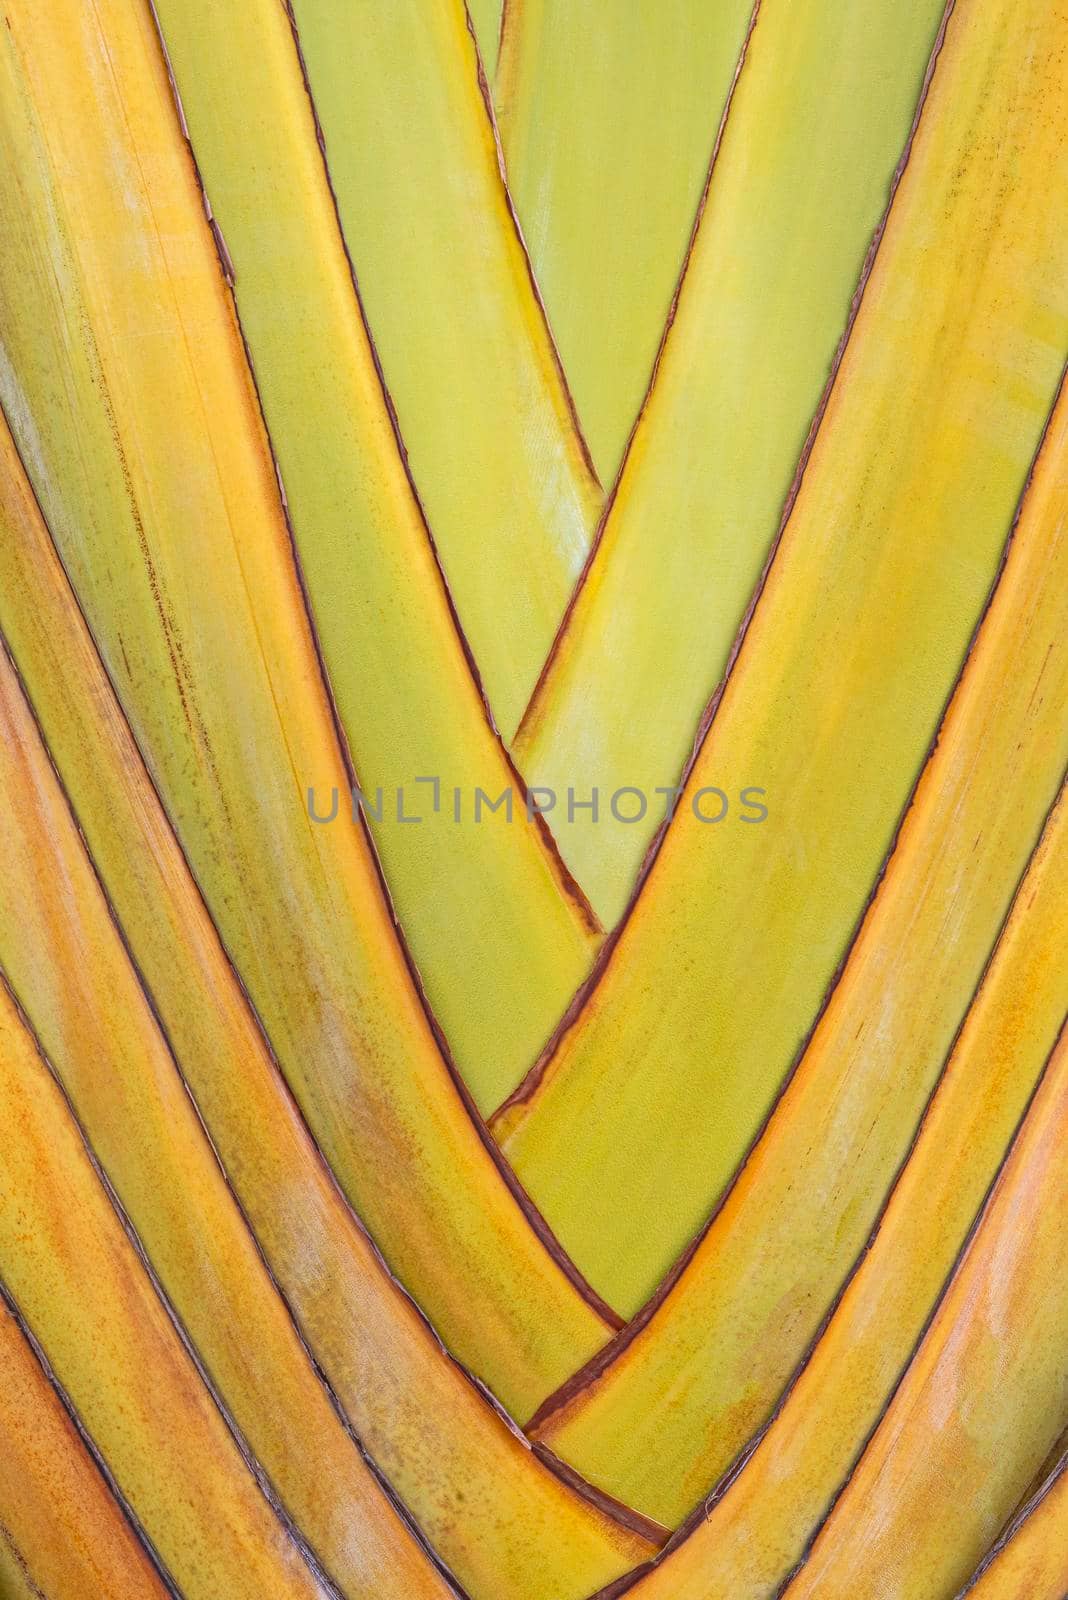 Closeup detail of ornamental banana plant leaves creating graphic resource background wallpaper